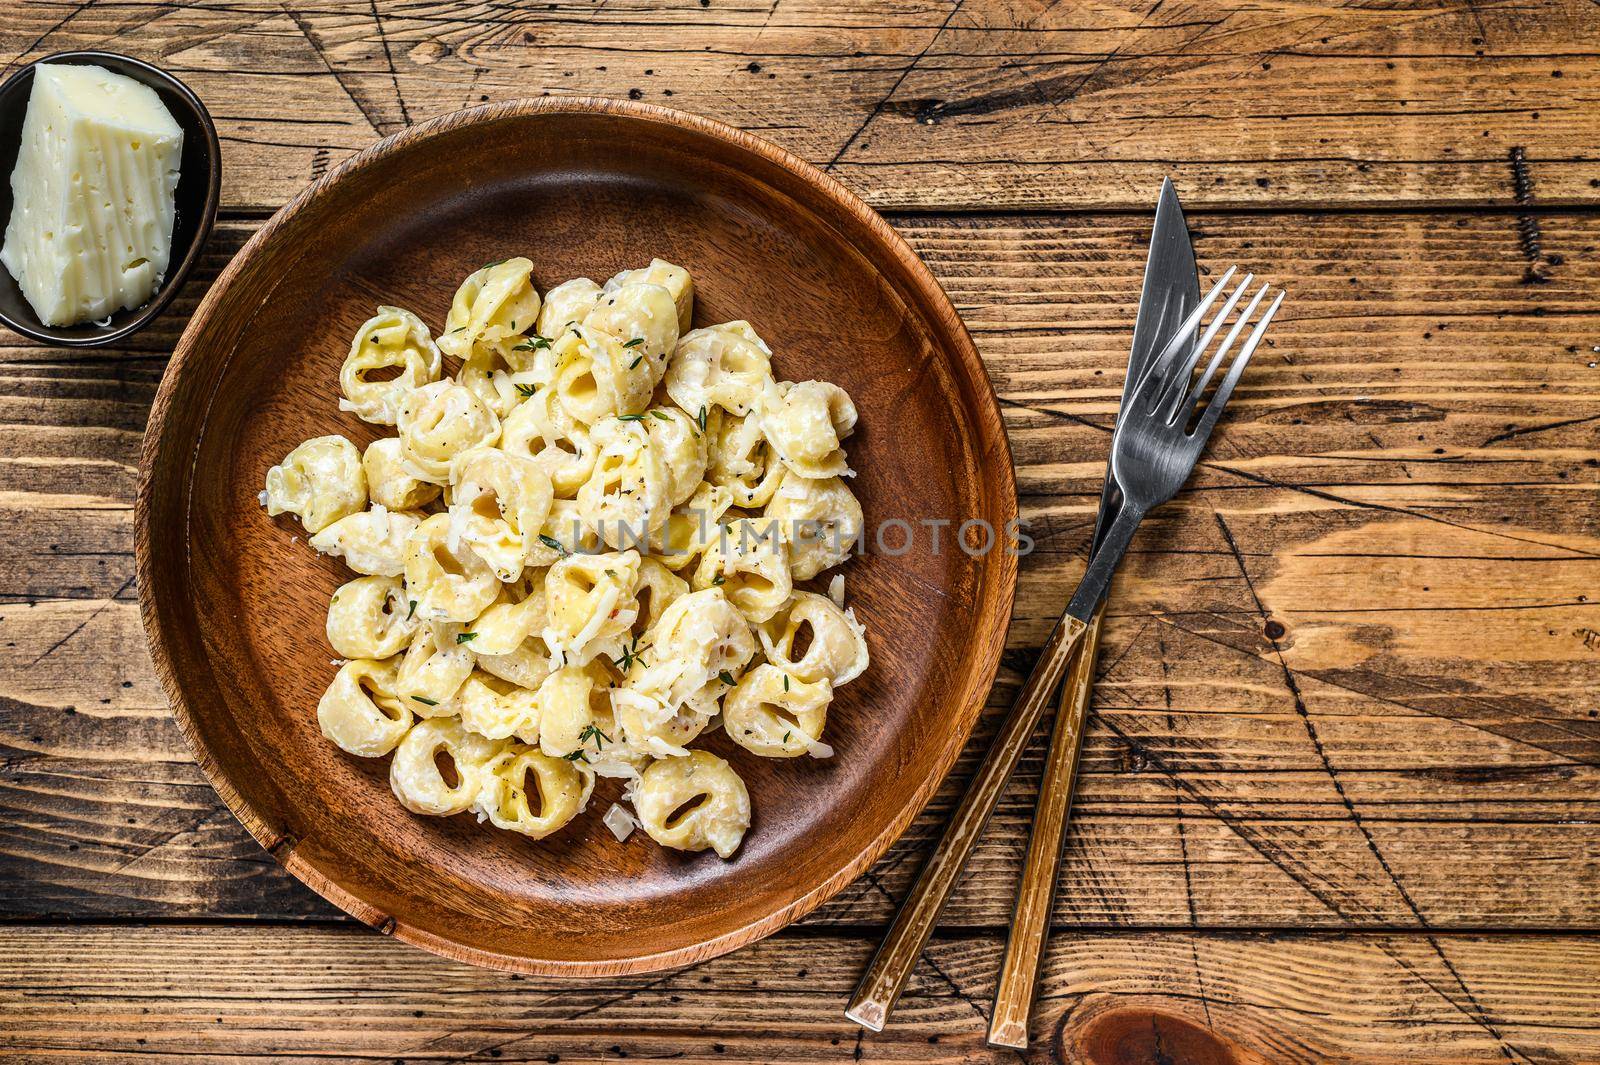 Ravioli or tortellini pasta in cream cheese sauce with meat. wooden background. Top view. Copy space by Composter